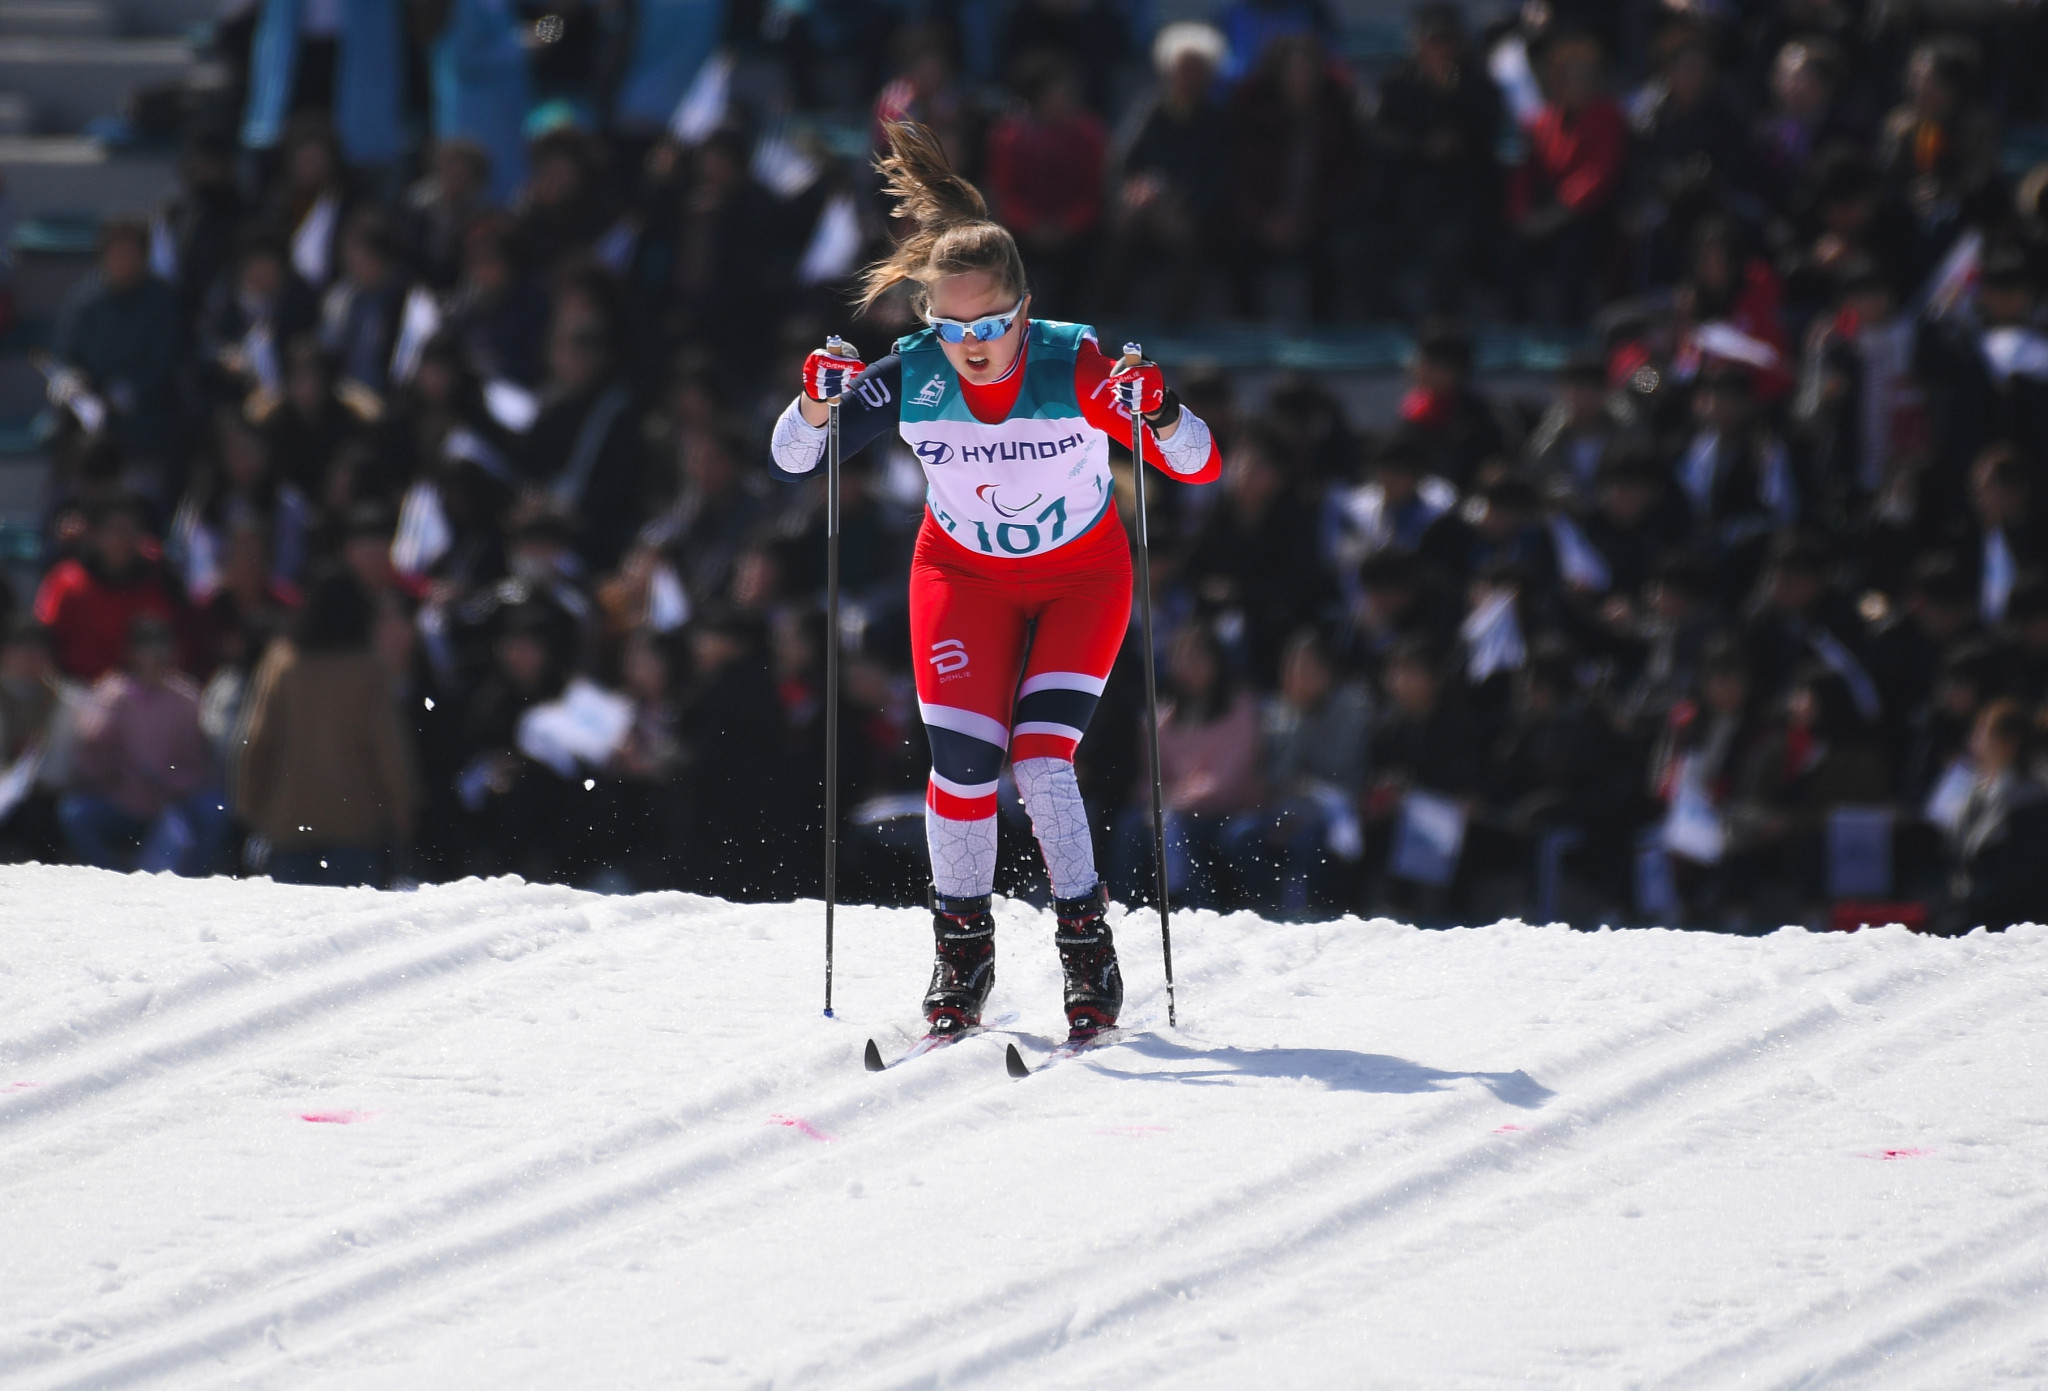 Vilde Nilsen came second after winning all three women's cross-country races at the Para Nordic Skiing World Cup in Vuokatti in Finland ©Getty Images